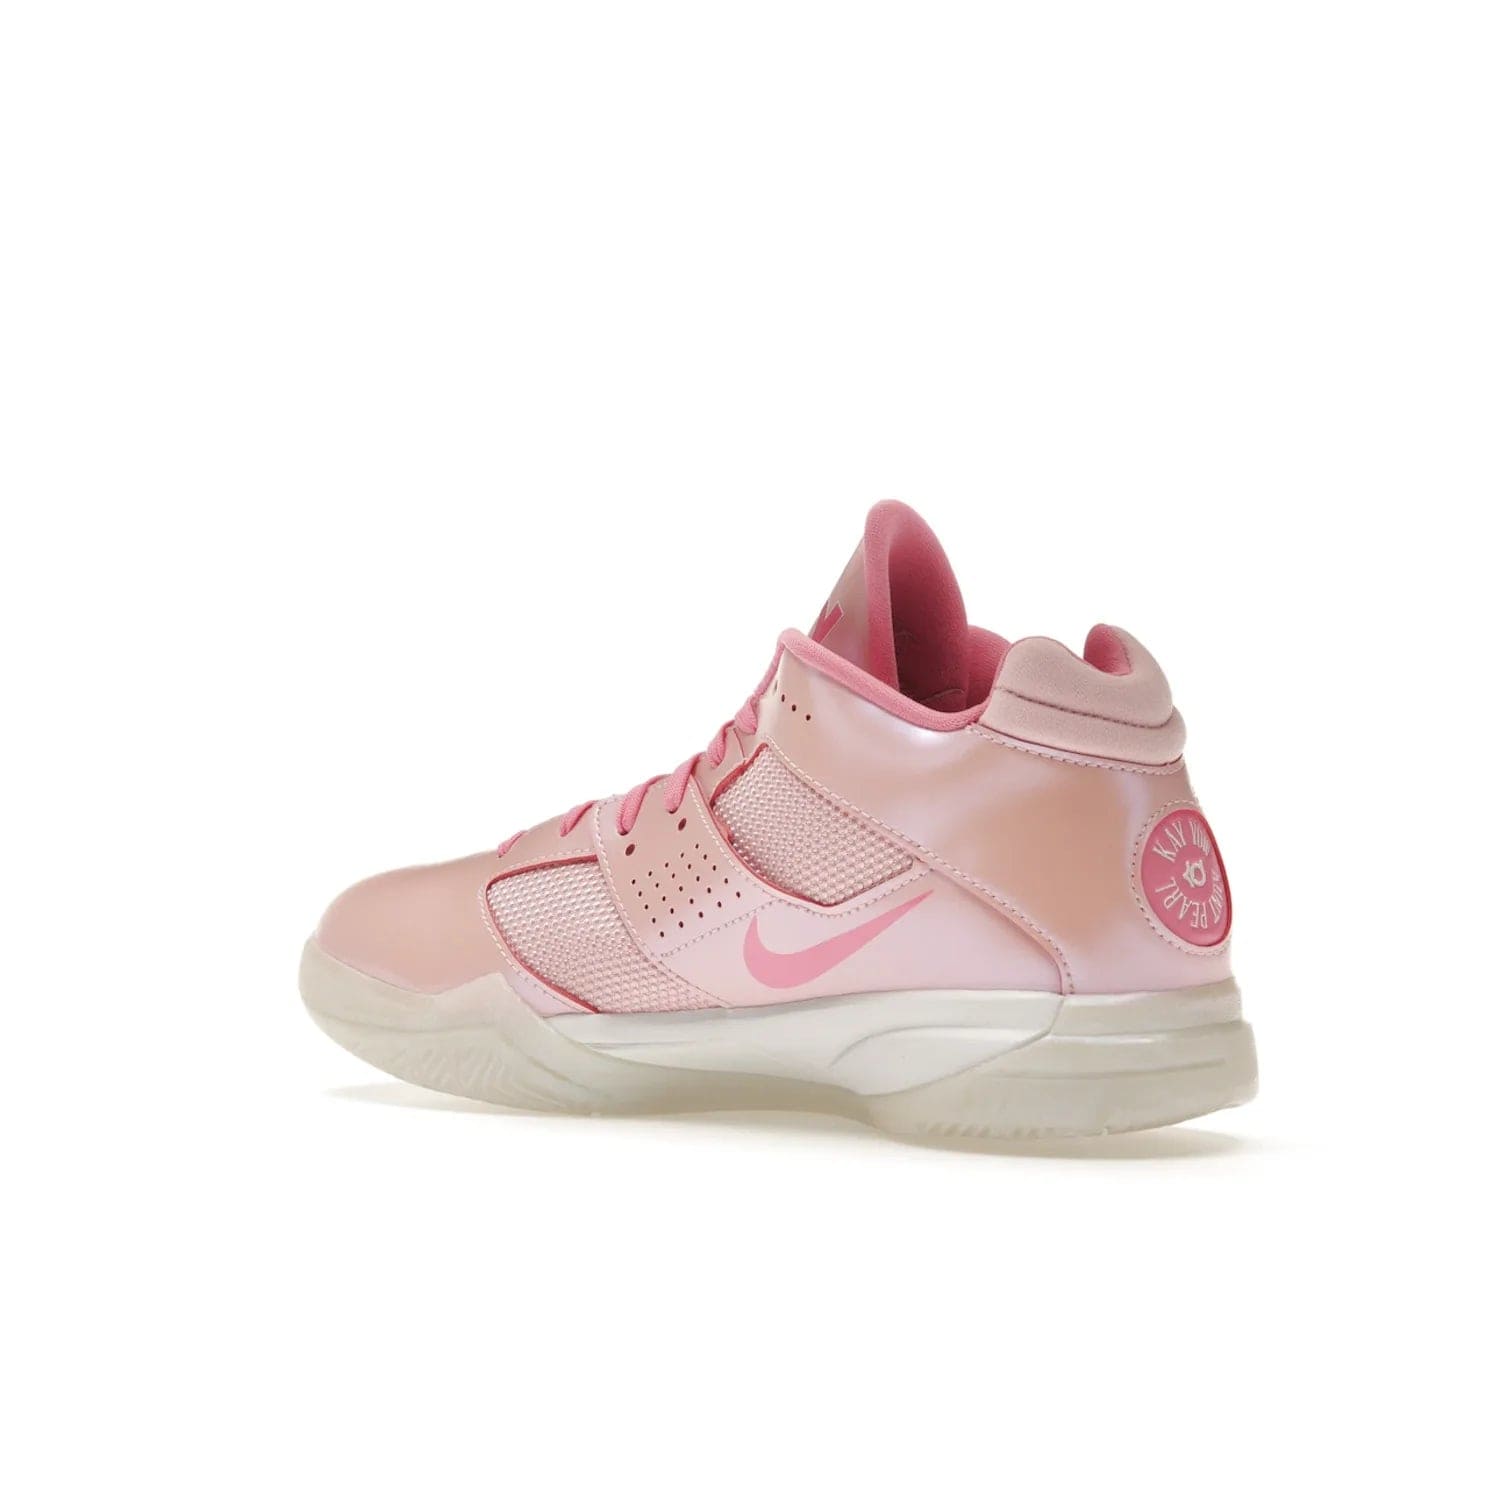 Nike KD 3 Aunt Pearl - Image 23 - Only at www.BallersClubKickz.com - Introducing the Nike KD 3 Aunt Pearl. Featuring a bold Medium Soft Pink, White, & Lotus Pink colorway. Get ready to stand out this October 15th.